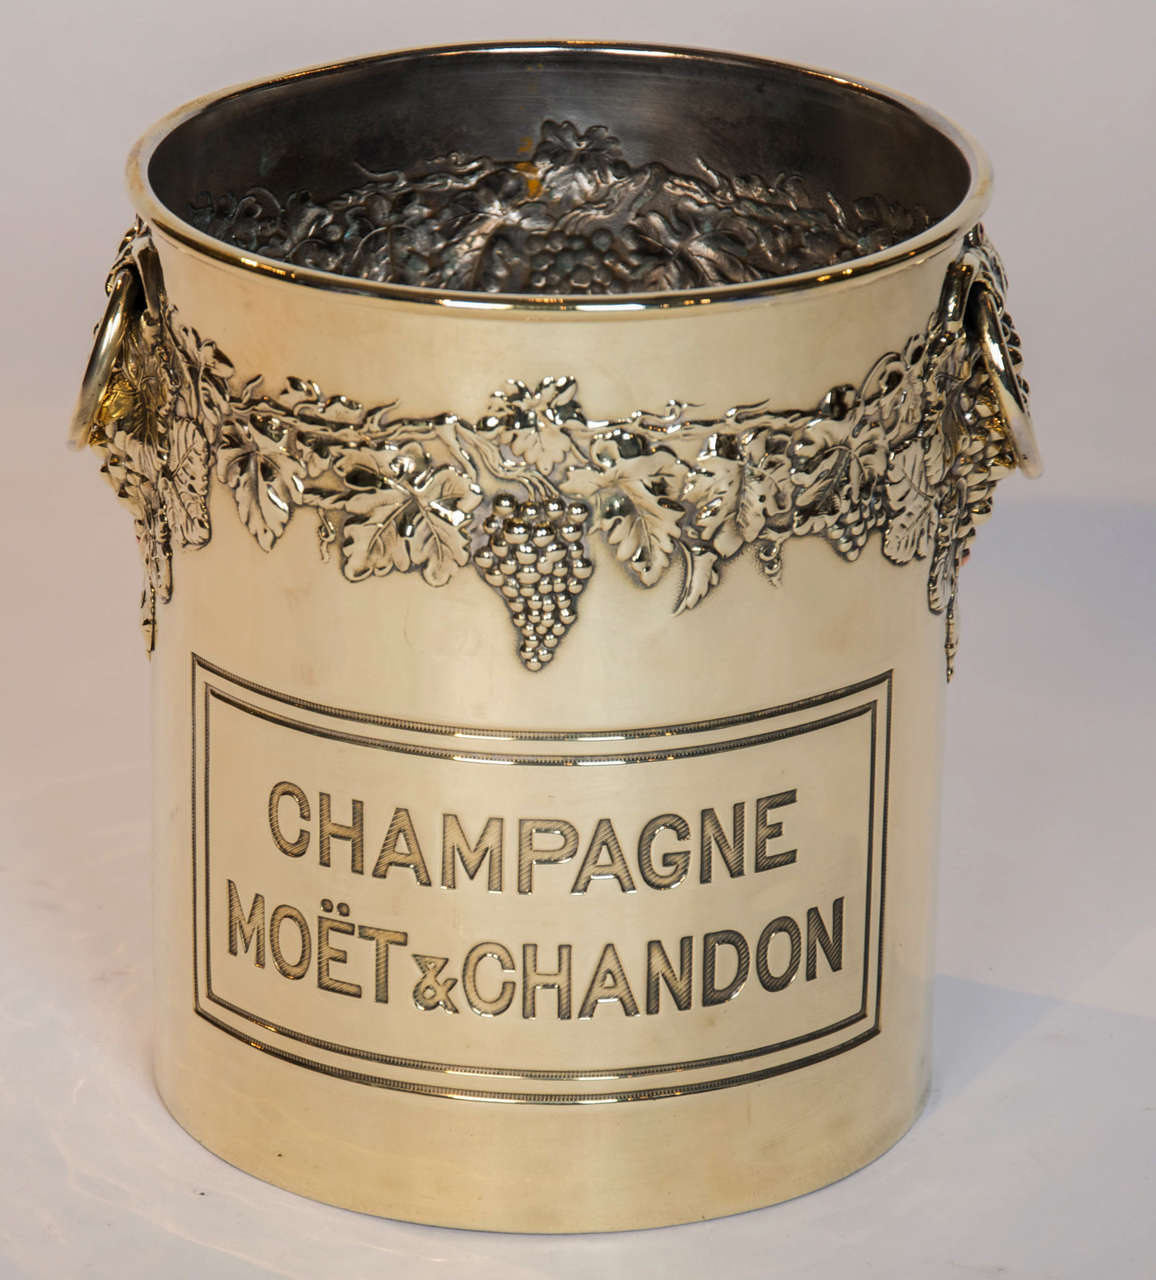 A Mid 20th century brass champagne bucket, the repousse decoration of vines all round with two rig handles.